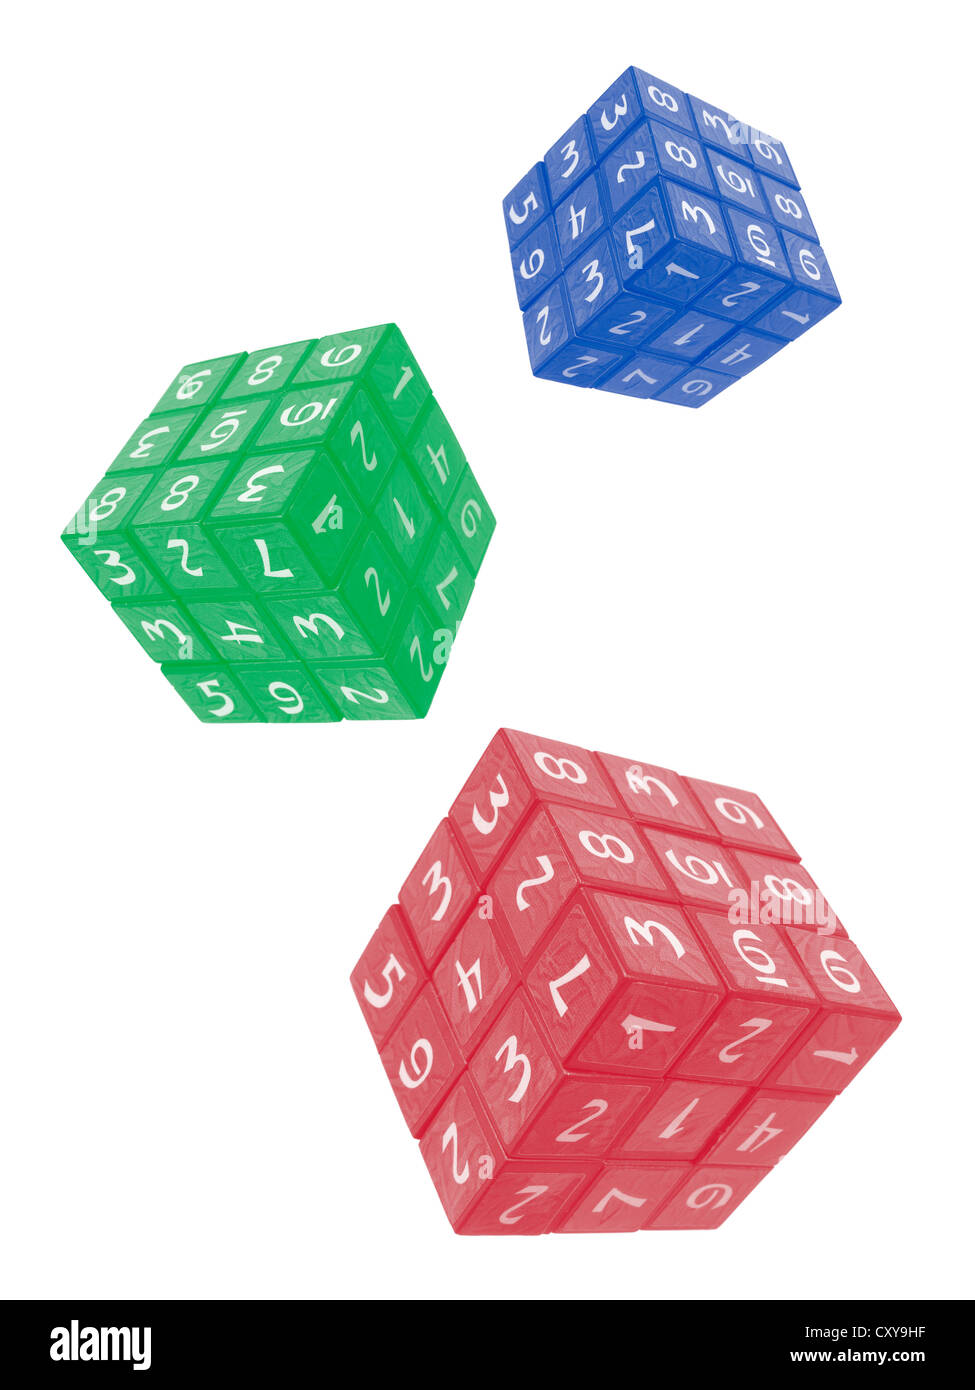 Number Cube Puzzles Stock Photo